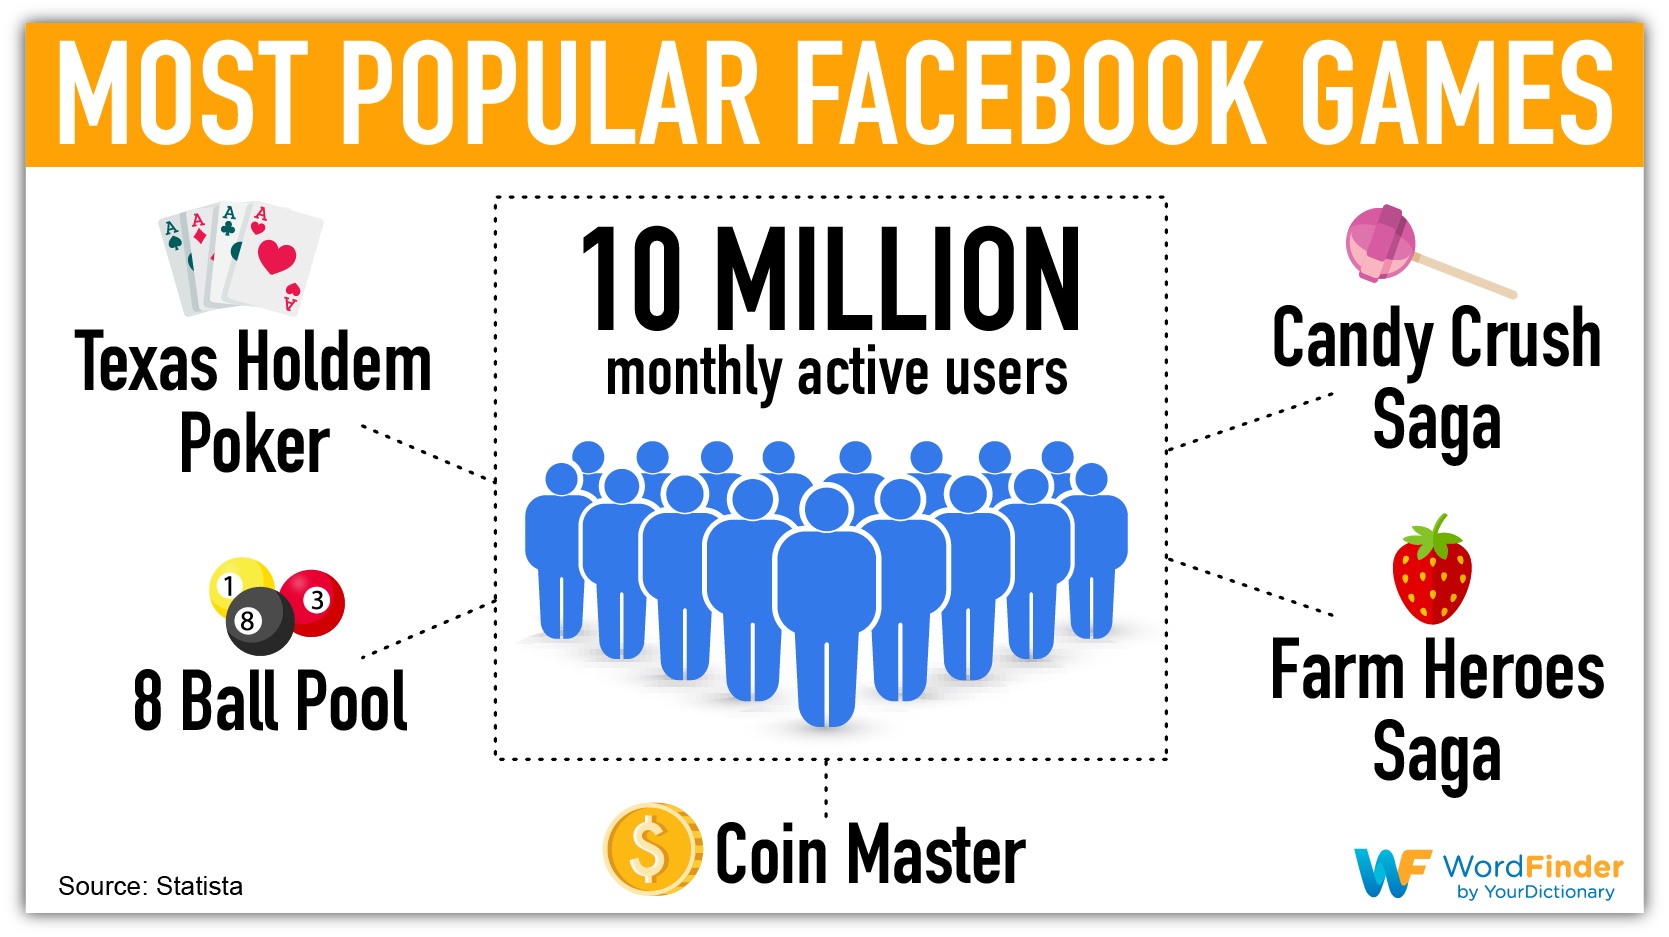 most popular facebook games infographic